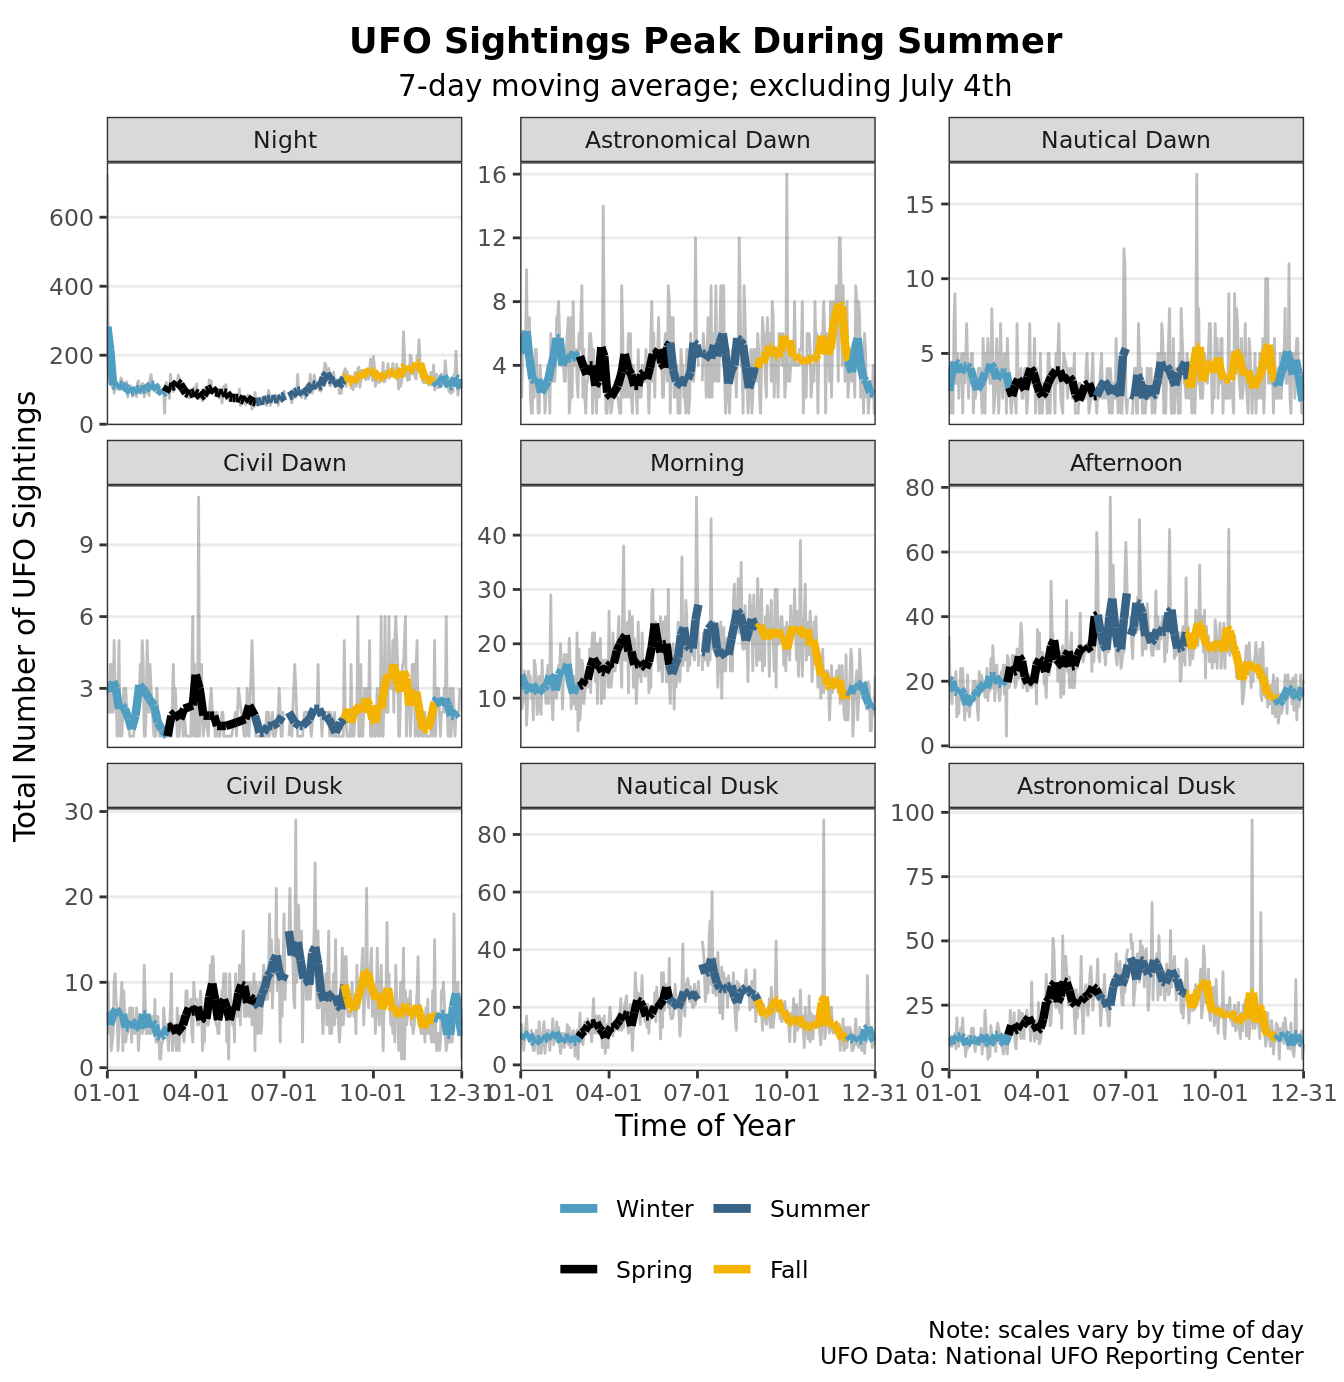 This figure is almost the same as the figure on the previous tab, except there is a discontinuity for July 4th-5th. Without this outlier present, it is much easier to see that UFO sightings pick up massively in the summer and fall off in the winter, especially at dusk.